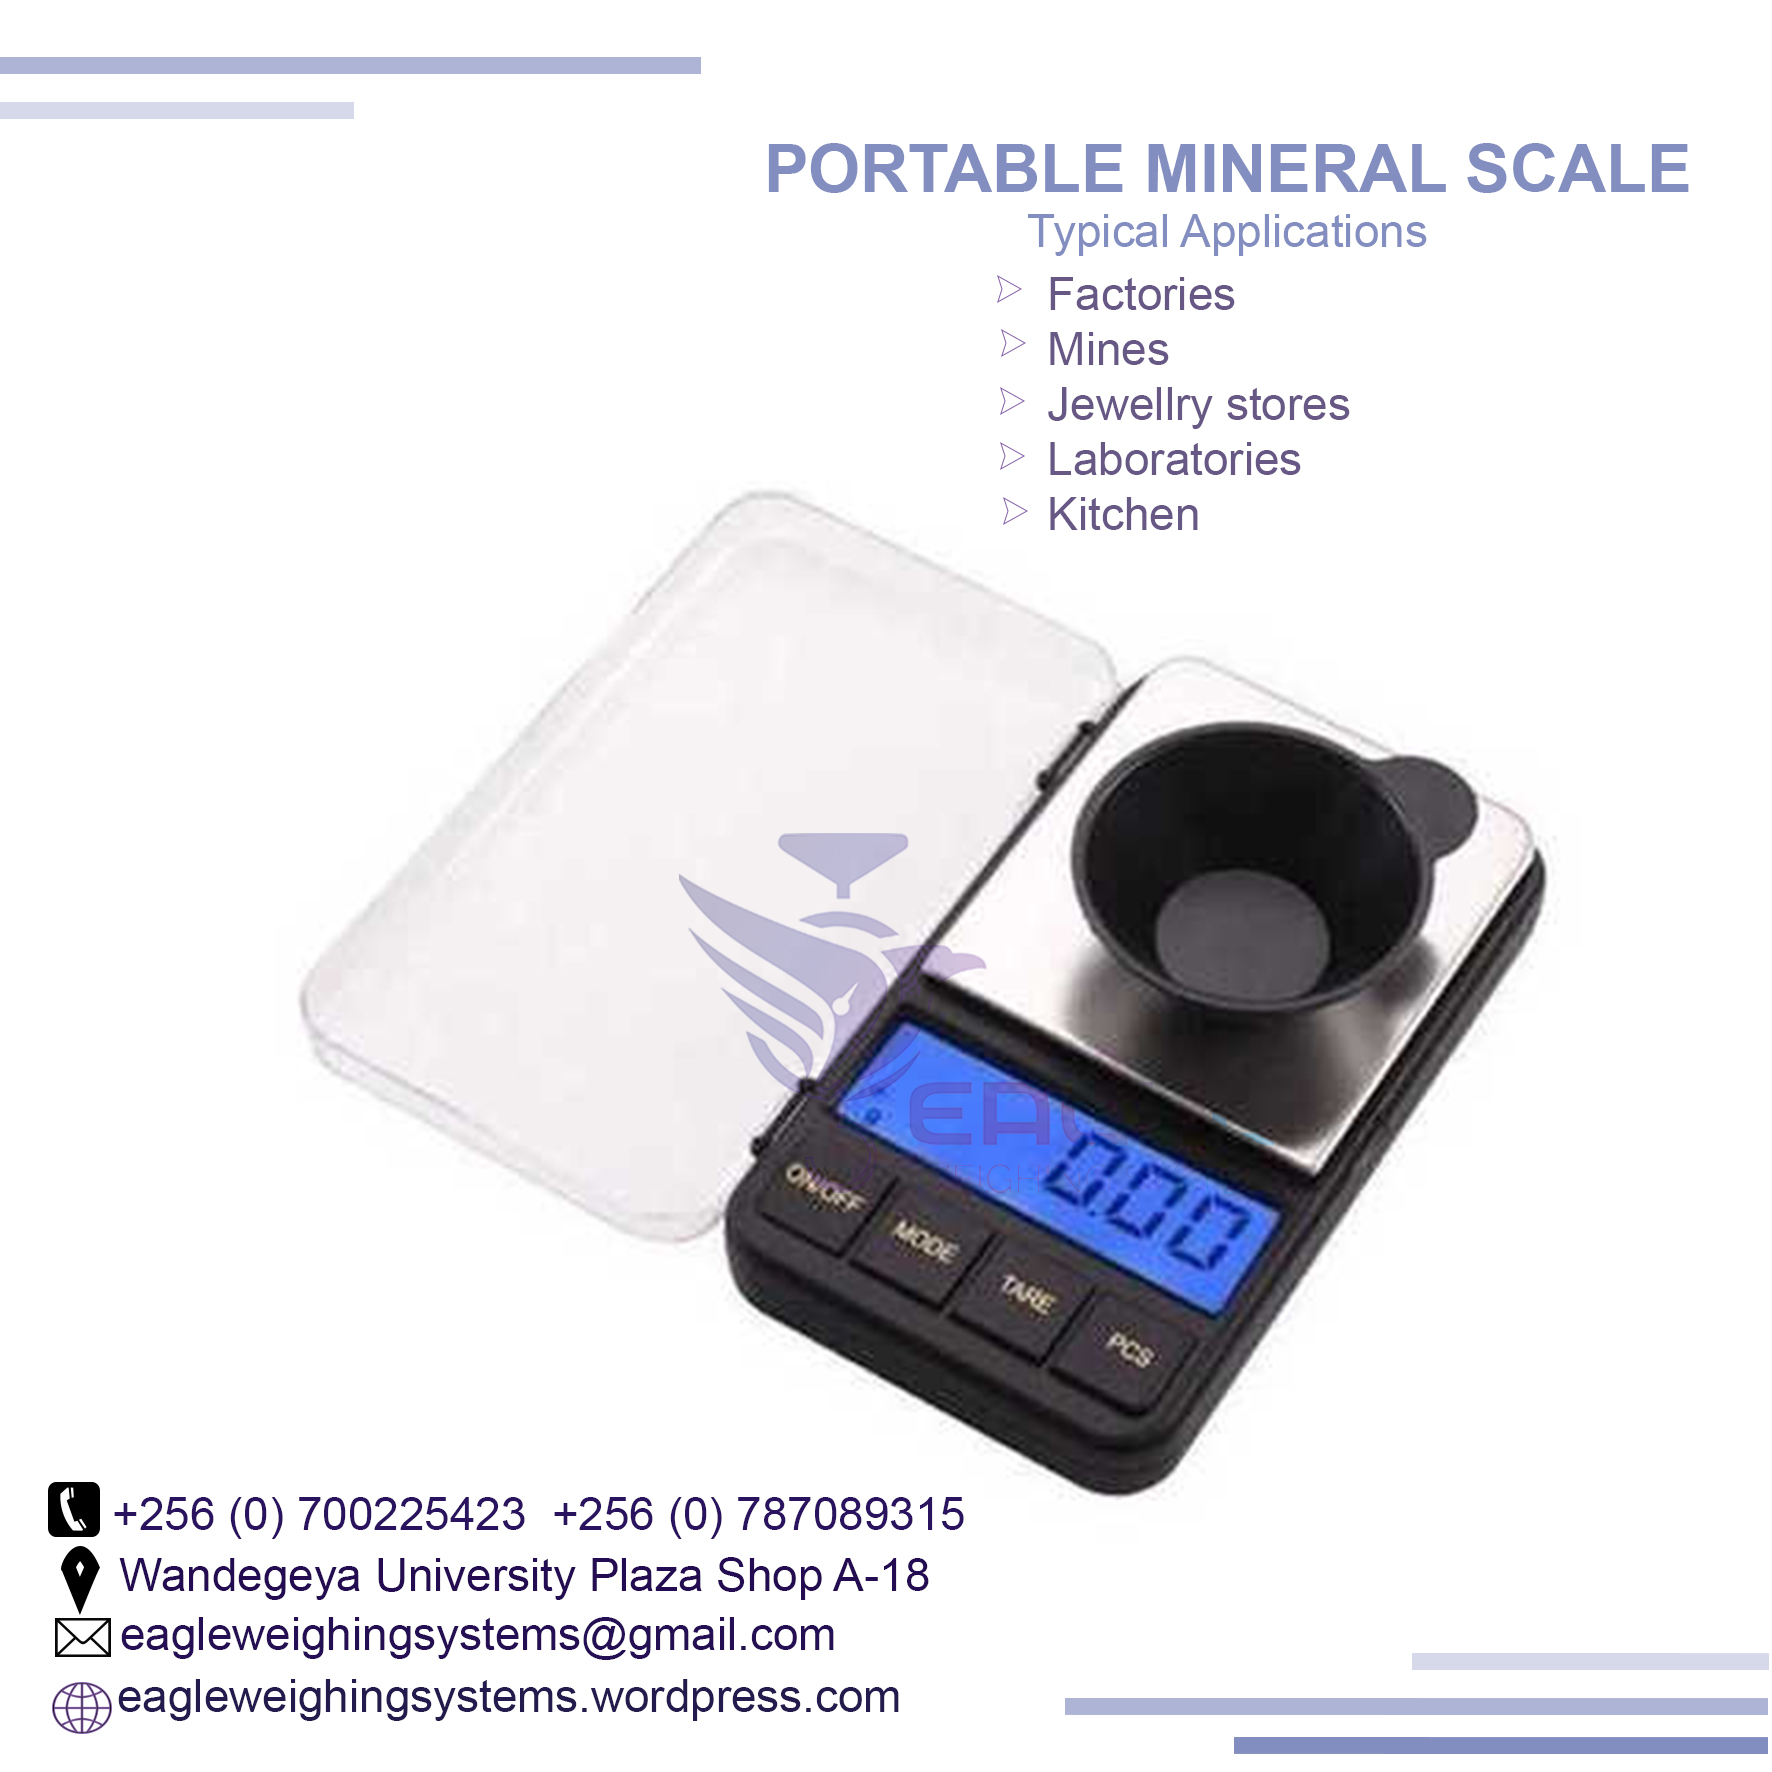 Portable mineral, jewelry counting weighing scales in Kampala Uganda, Kampala Central Division, Central, Uganda